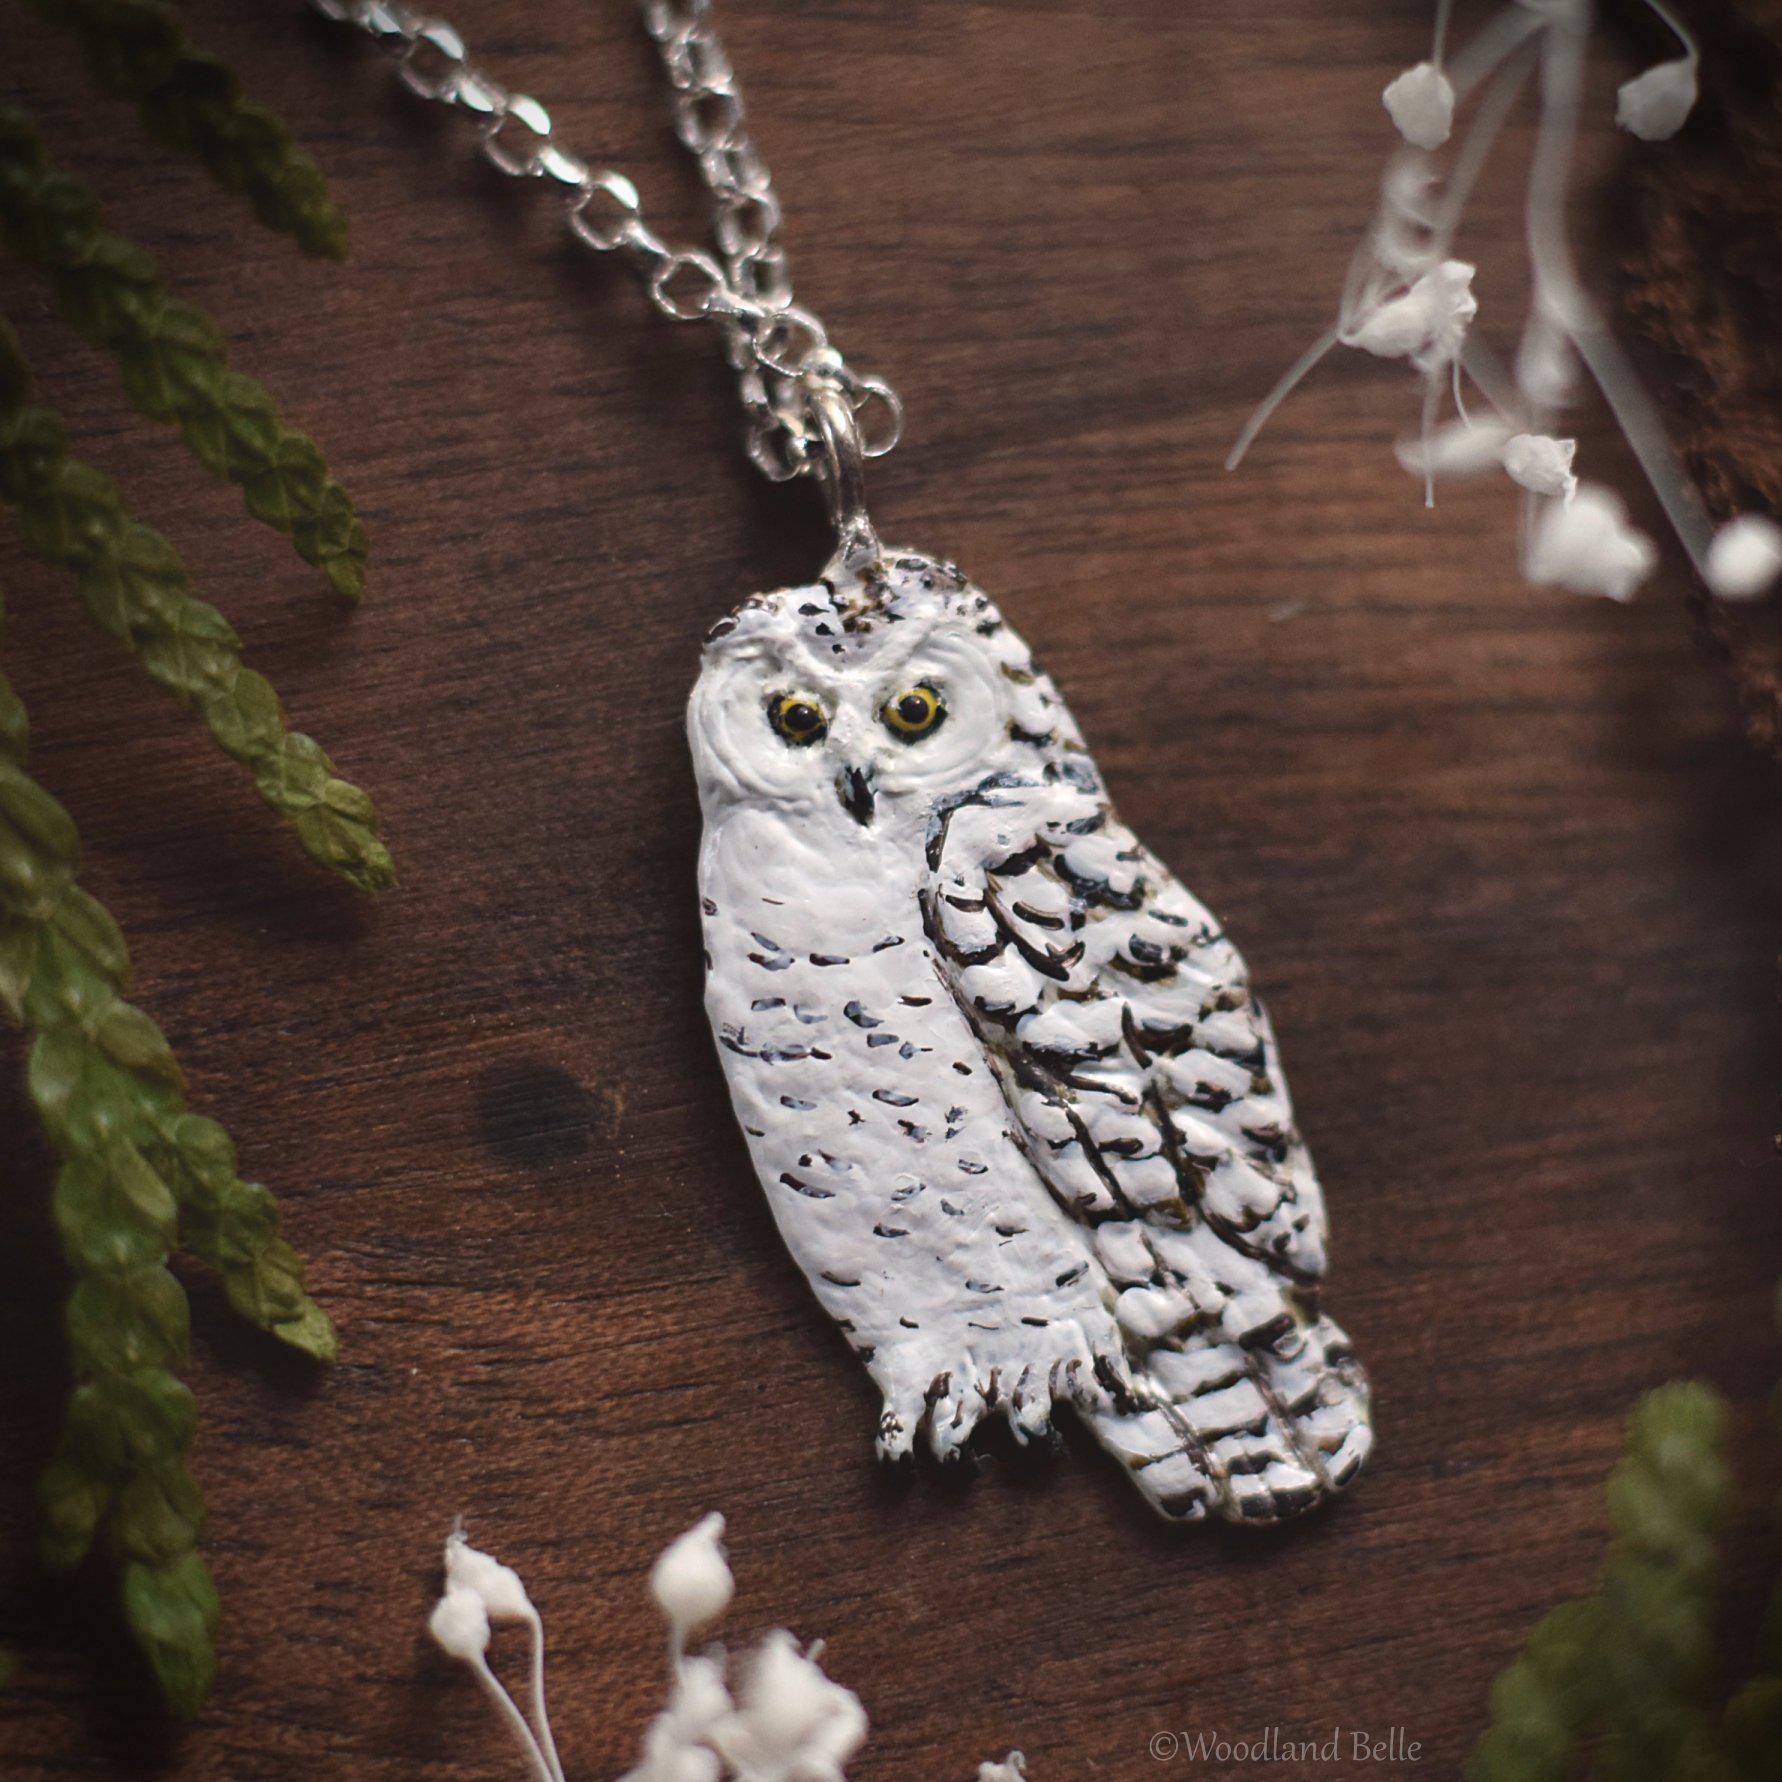 Owl Necklace - Enameled Snowy Owl Pendant - Sterling Silver White Owl - Hedwig Necklace - Bird/Owl Lover Jewelry Gift - by Woodland Belle